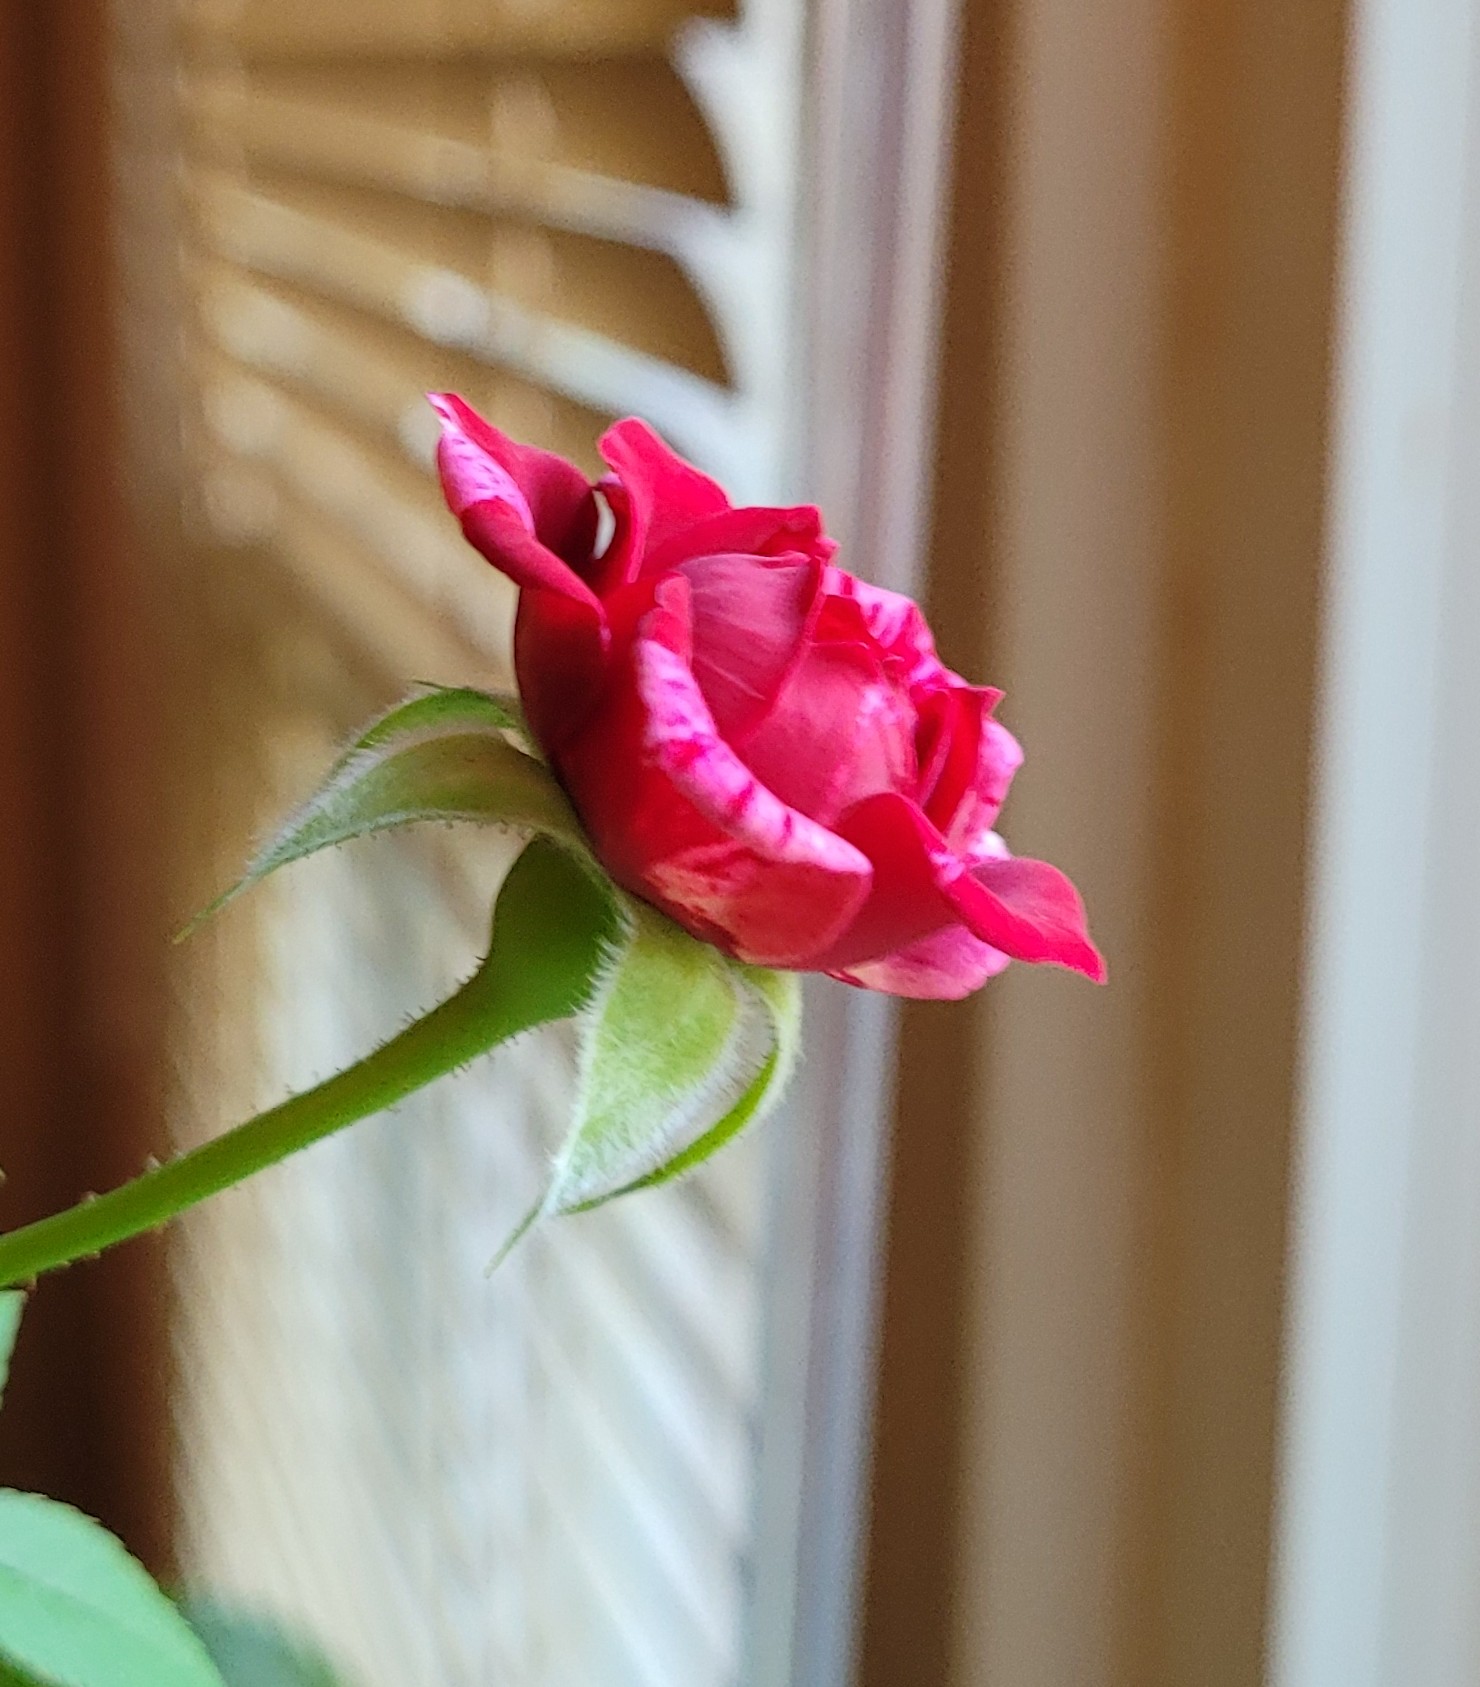 A miniature rose with a red bloom